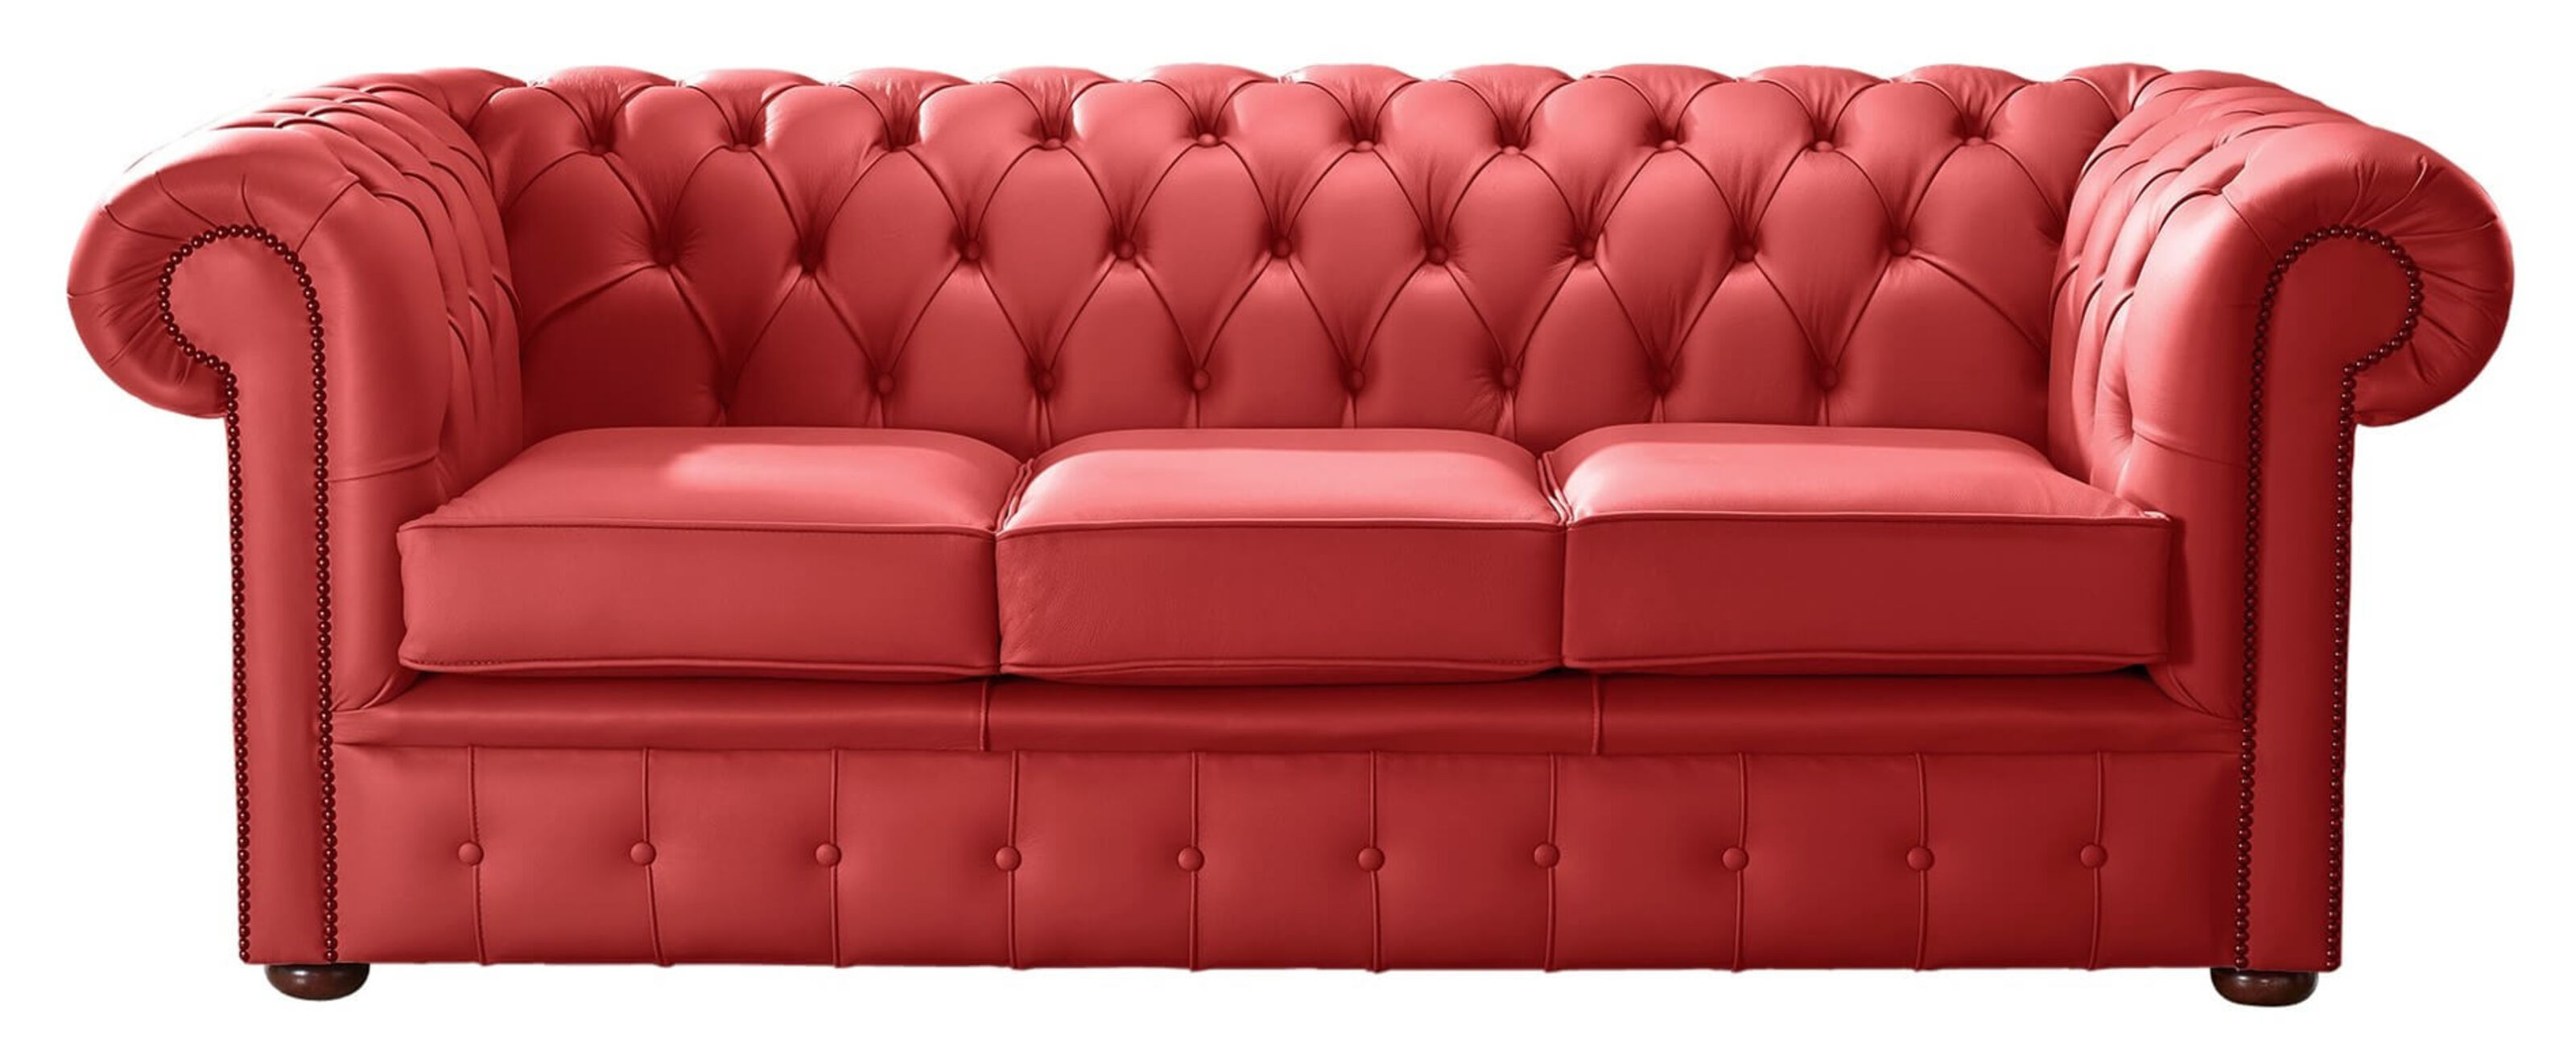 Elevate Hotel Elegance with Chesterfield Sofas  %Post Title